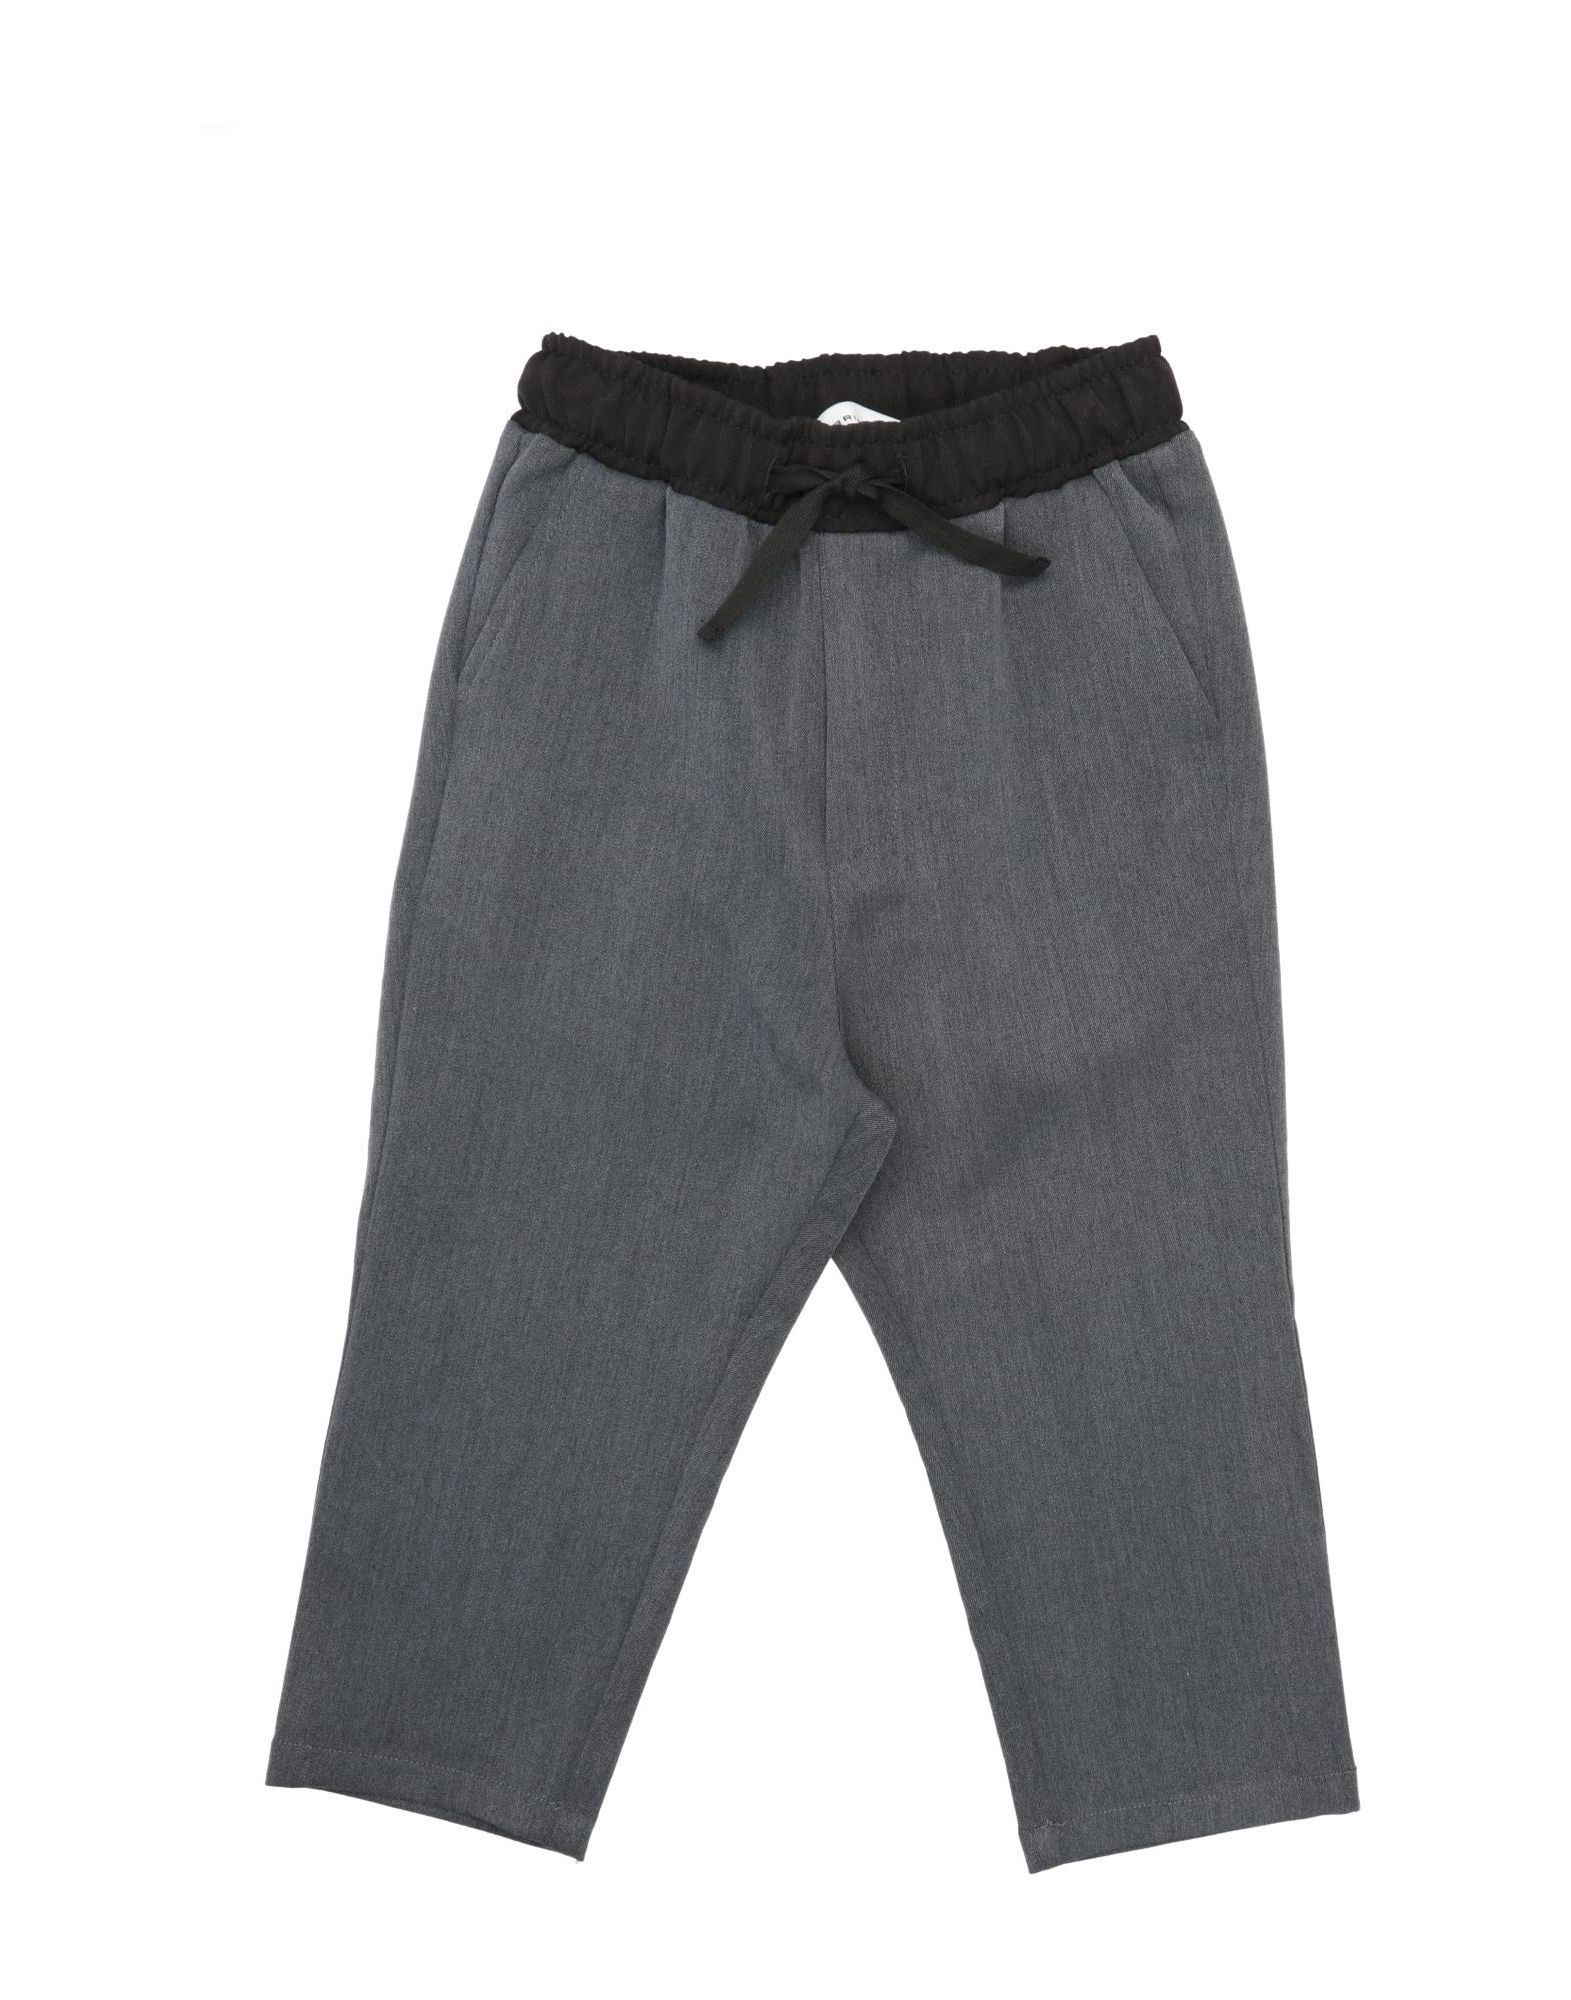 Shop Brian Rush Toddler Boy Pants Lead Size 3 Polyester, Viscose, Elastane In Grey